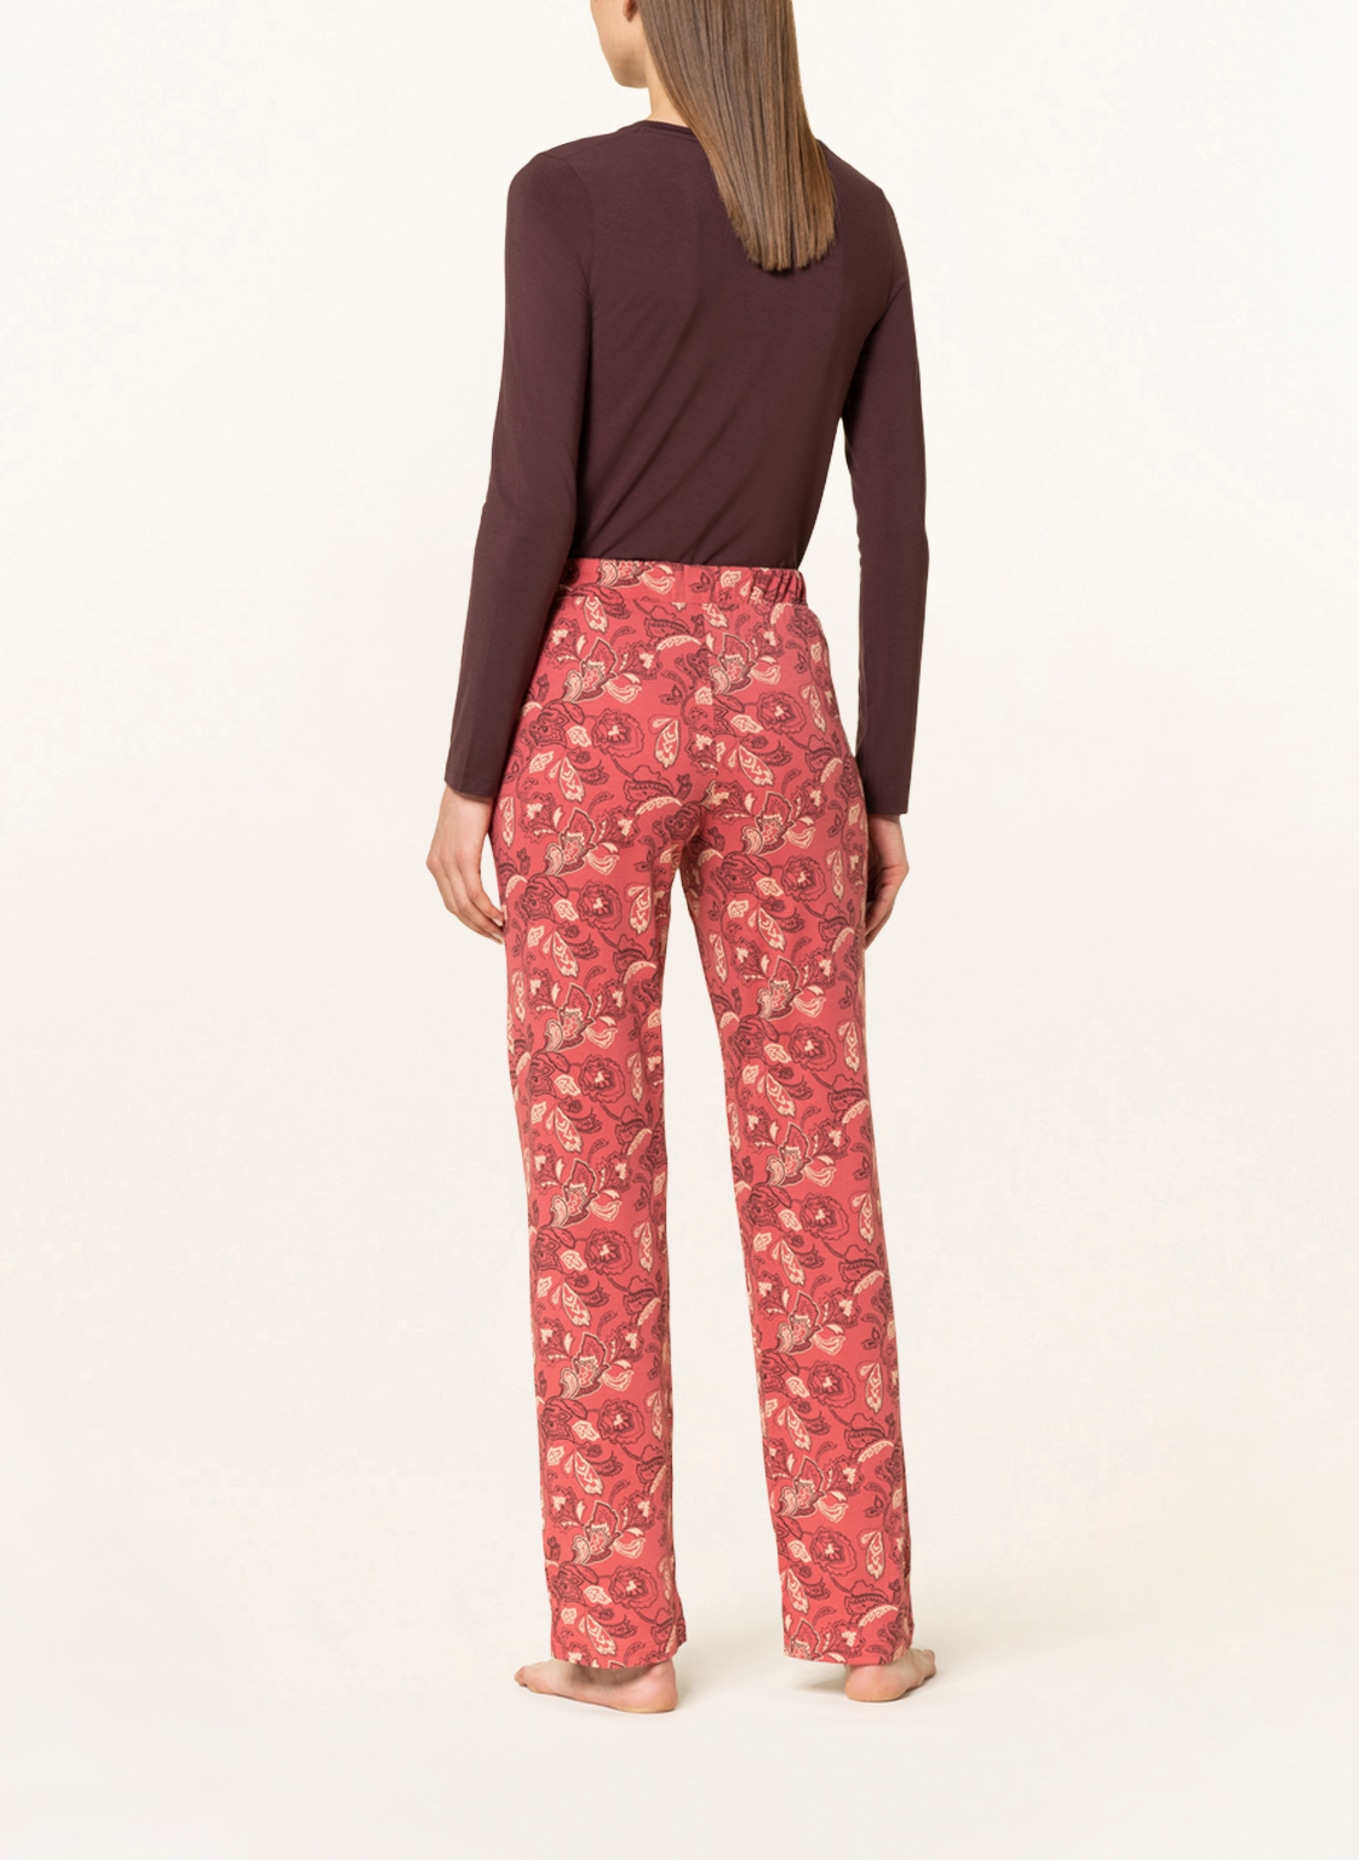 SCHIESSER Pajama pants MIX+RELAX, Color: LIGHT RED/ LIGHT YELLOW/ DARK BROWN (Image 3)